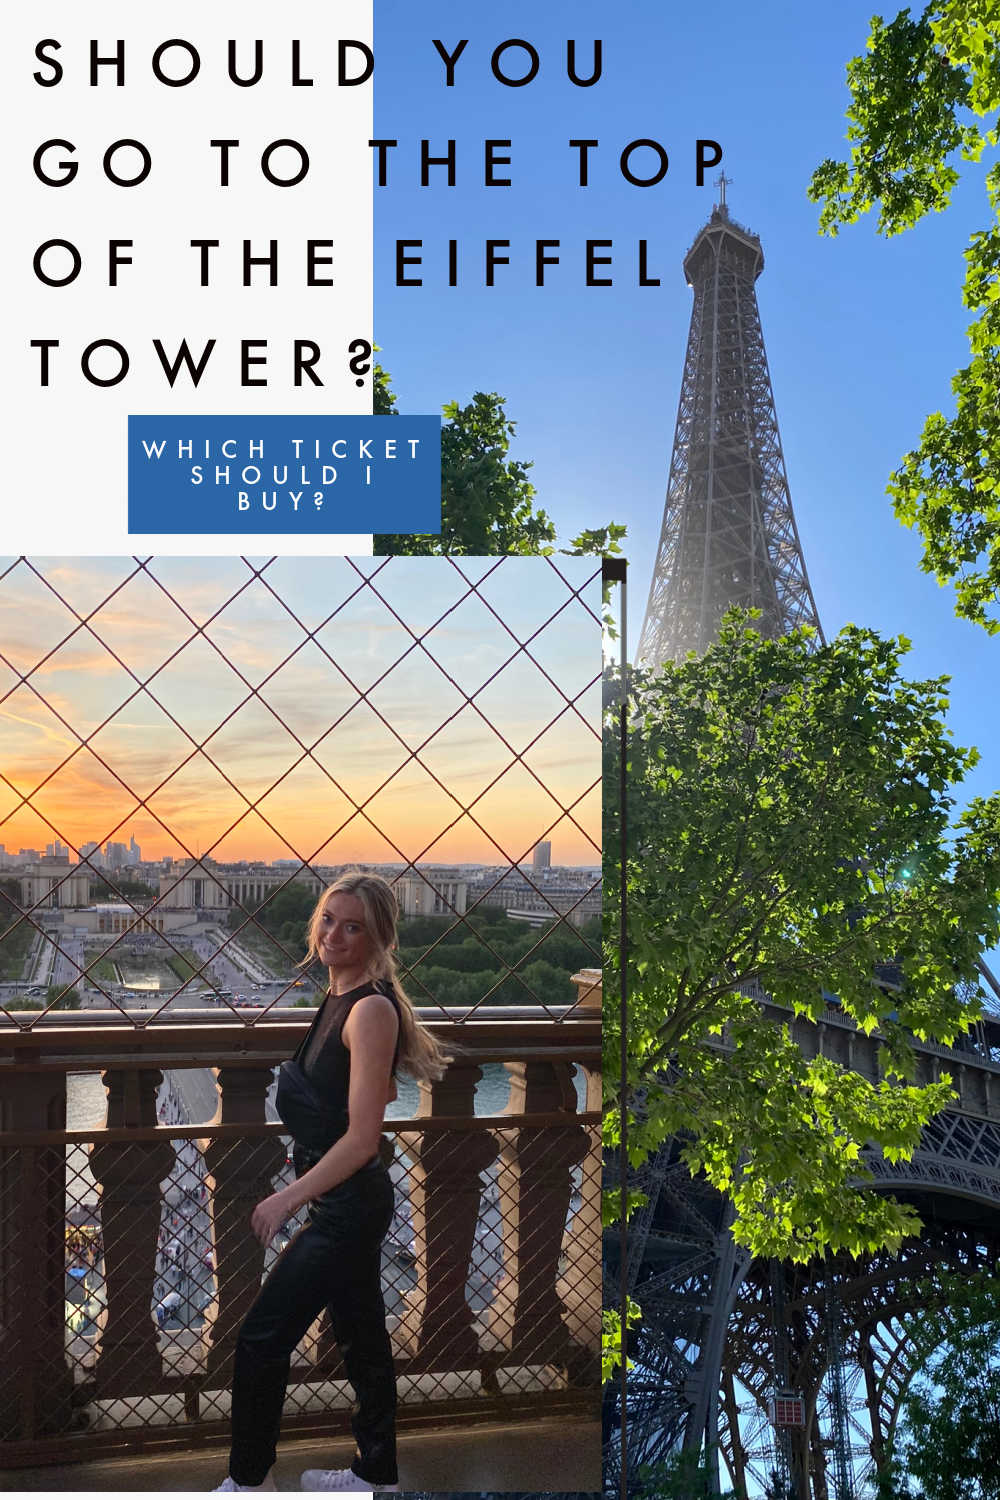 SHOULD YOU GO TO THE TOP OF THE EIFFEL TOWER